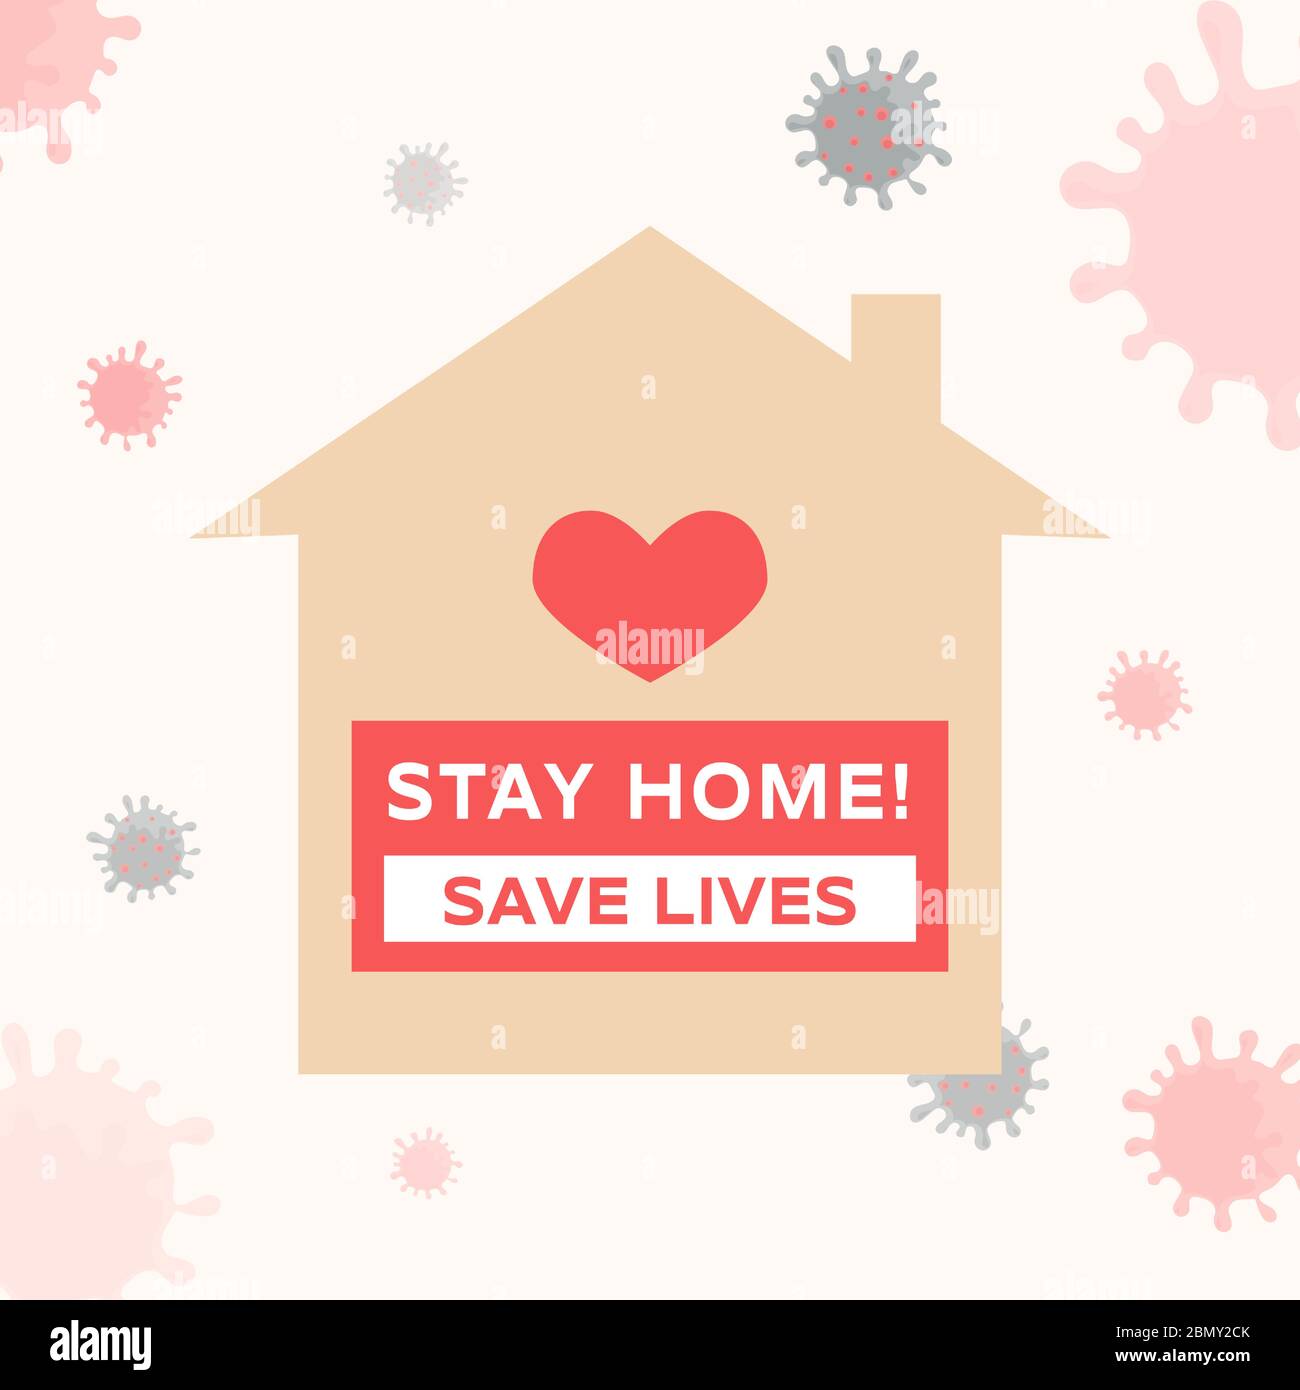 Stay home and save lives flat illustration. House silhouette surrounded Coronavirus cells. Quarantine and self isolation during outbreak of covid-19, global pandemic vector concept. Stock Vector